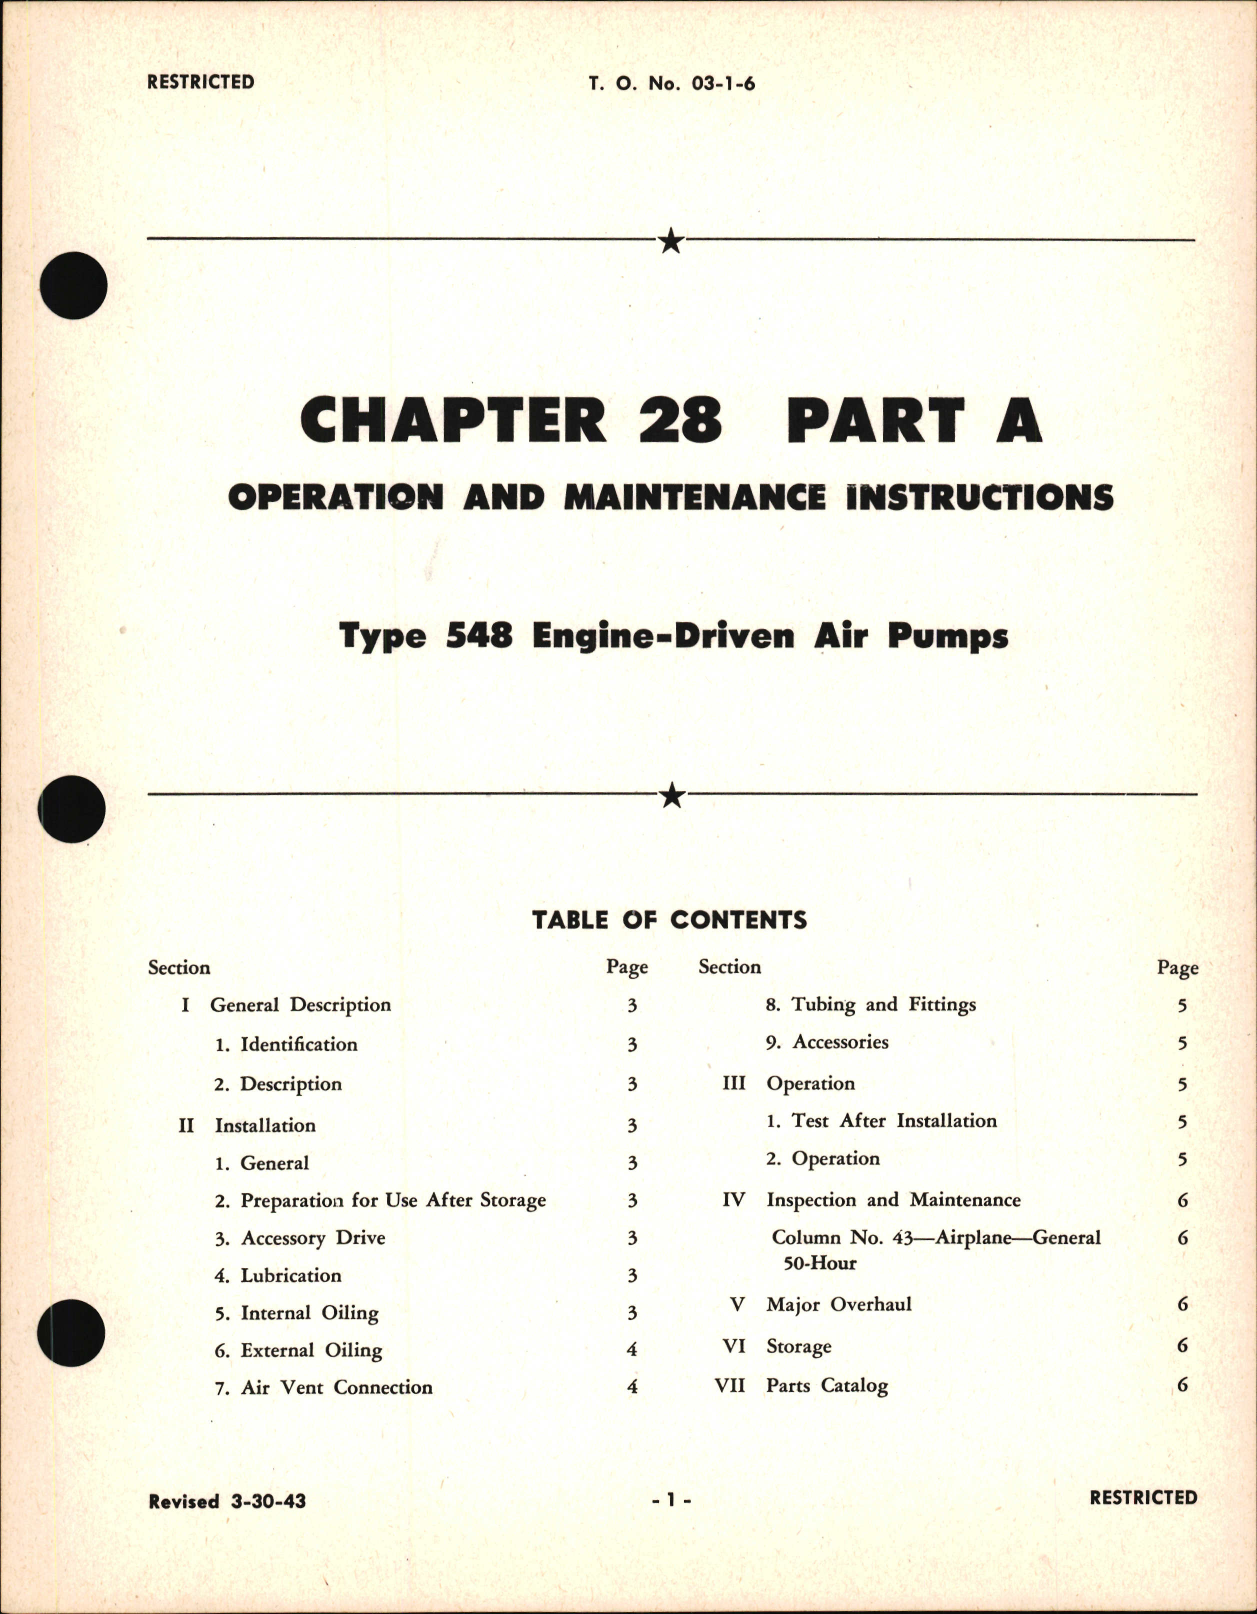 Sample page 1 from AirCorps Library document: Operation and Maintenance Instructions for Engine Driven Air Pumps, Type 548